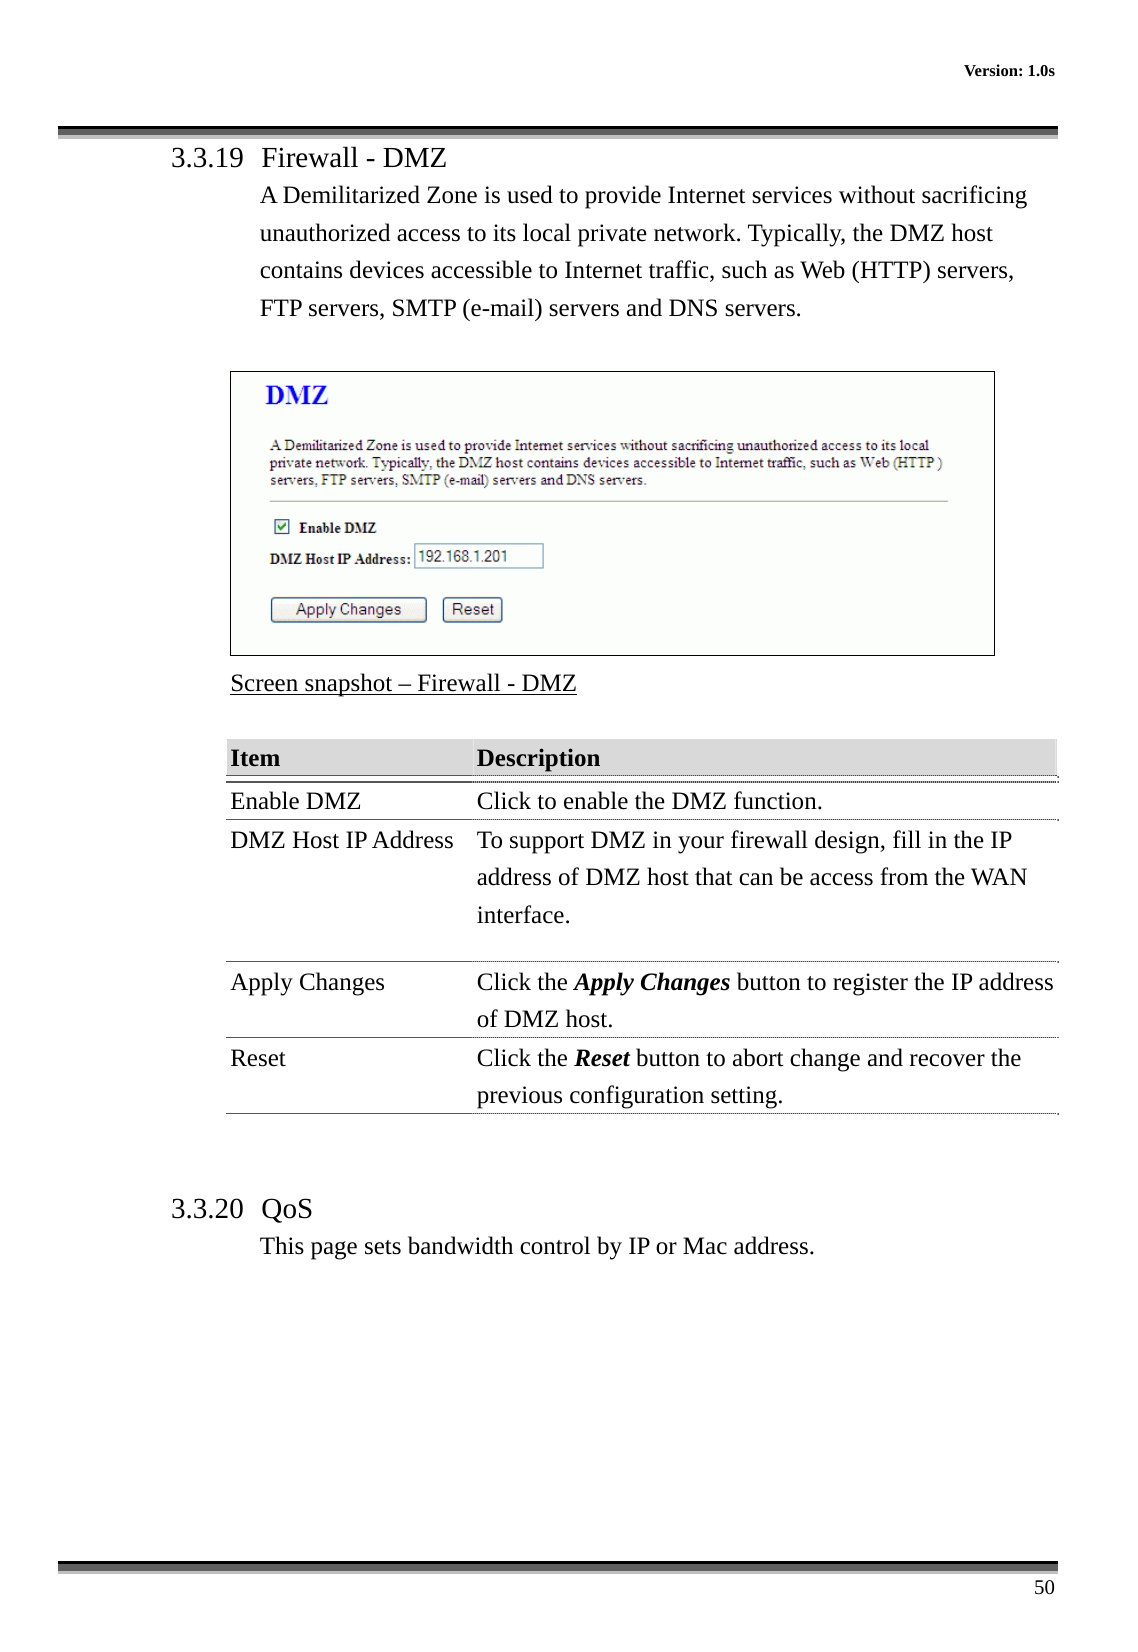      Version: 1.0s      50 3.3.19  Firewall - DMZ A Demilitarized Zone is used to provide Internet services without sacrificing unauthorized access to its local private network. Typically, the DMZ host contains devices accessible to Internet traffic, such as Web (HTTP) servers, FTP servers, SMTP (e-mail) servers and DNS servers.   Screen snapshot – Firewall - DMZ  Item  Description   Enable DMZ  Click to enable the DMZ function. DMZ Host IP Address  To support DMZ in your firewall design, fill in the IP address of DMZ host that can be access from the WAN interface. Apply Changes  Click the Apply Changes button to register the IP address of DMZ host. Reset Click the Reset button to abort change and recover the previous configuration setting.   3.3.20  QoS This page sets bandwidth control by IP or Mac address.  